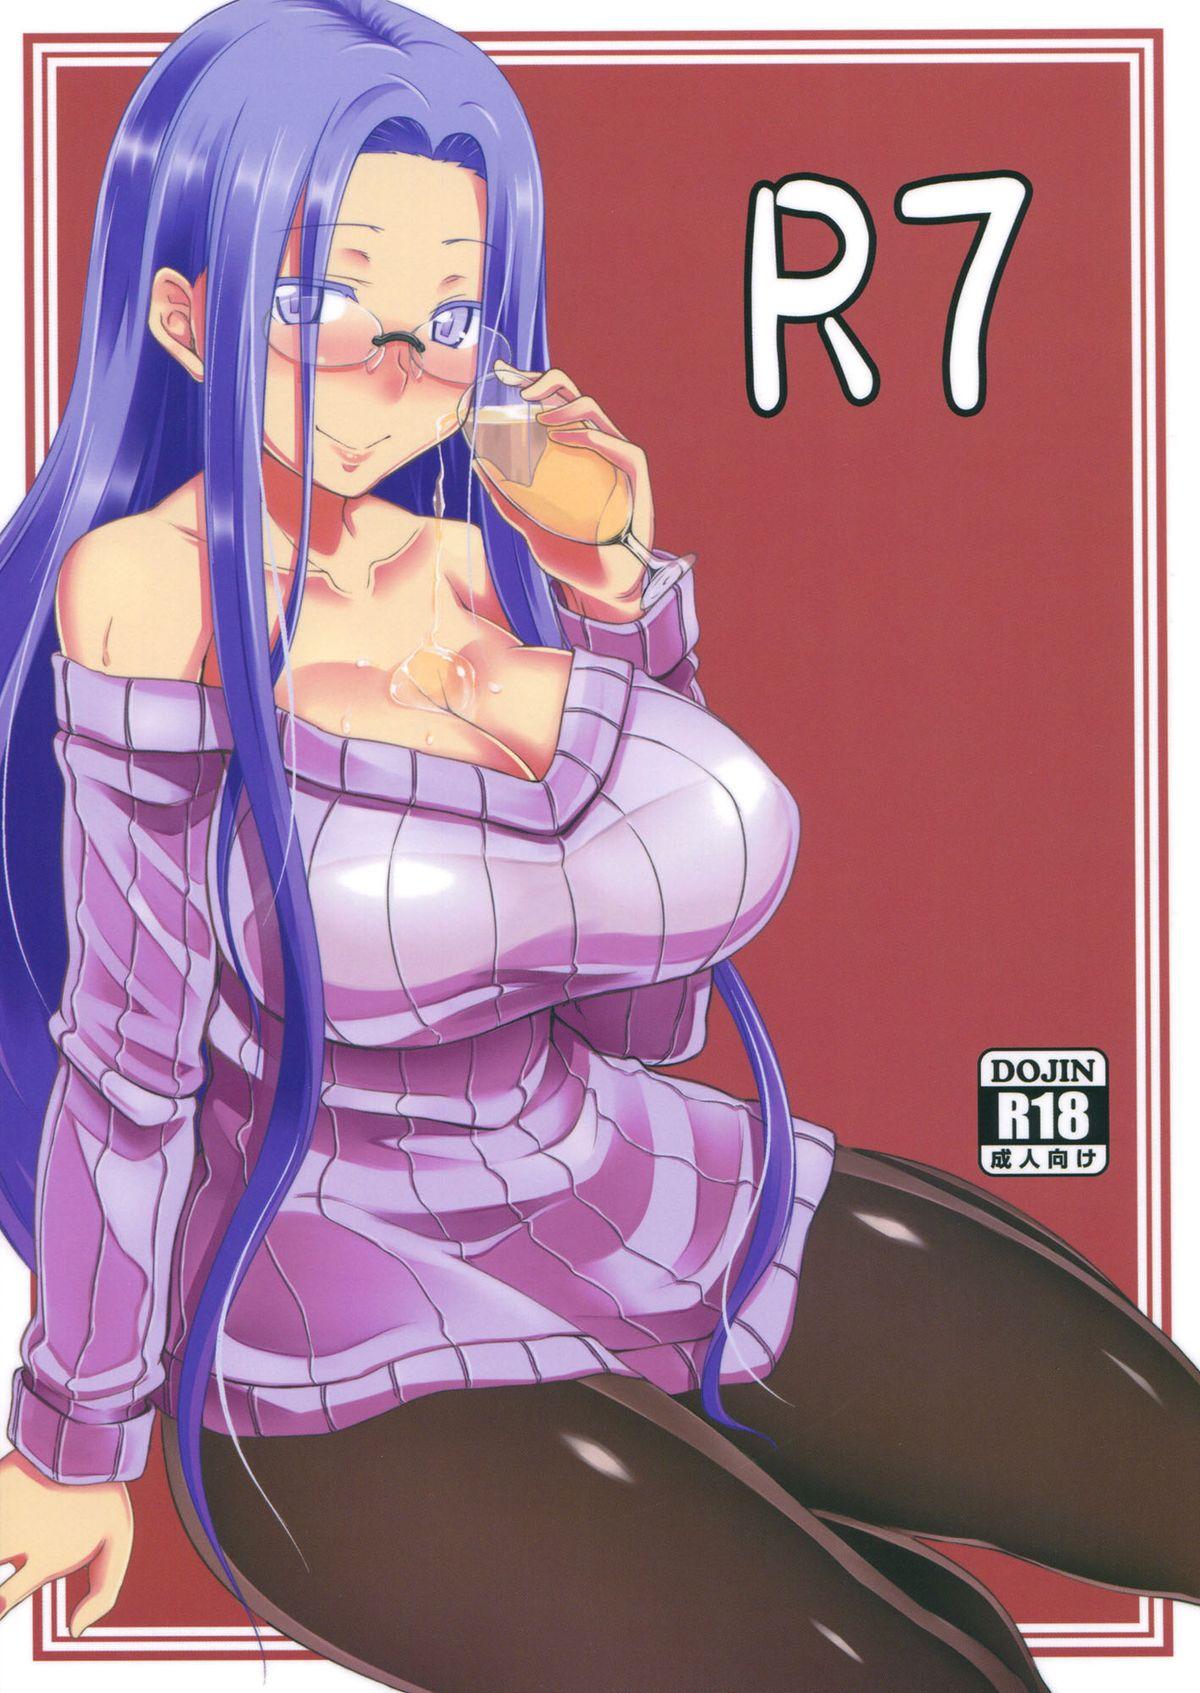 R7 (C83) [白樺通り (DRY)] (Fate/hollow ataraxia) 0